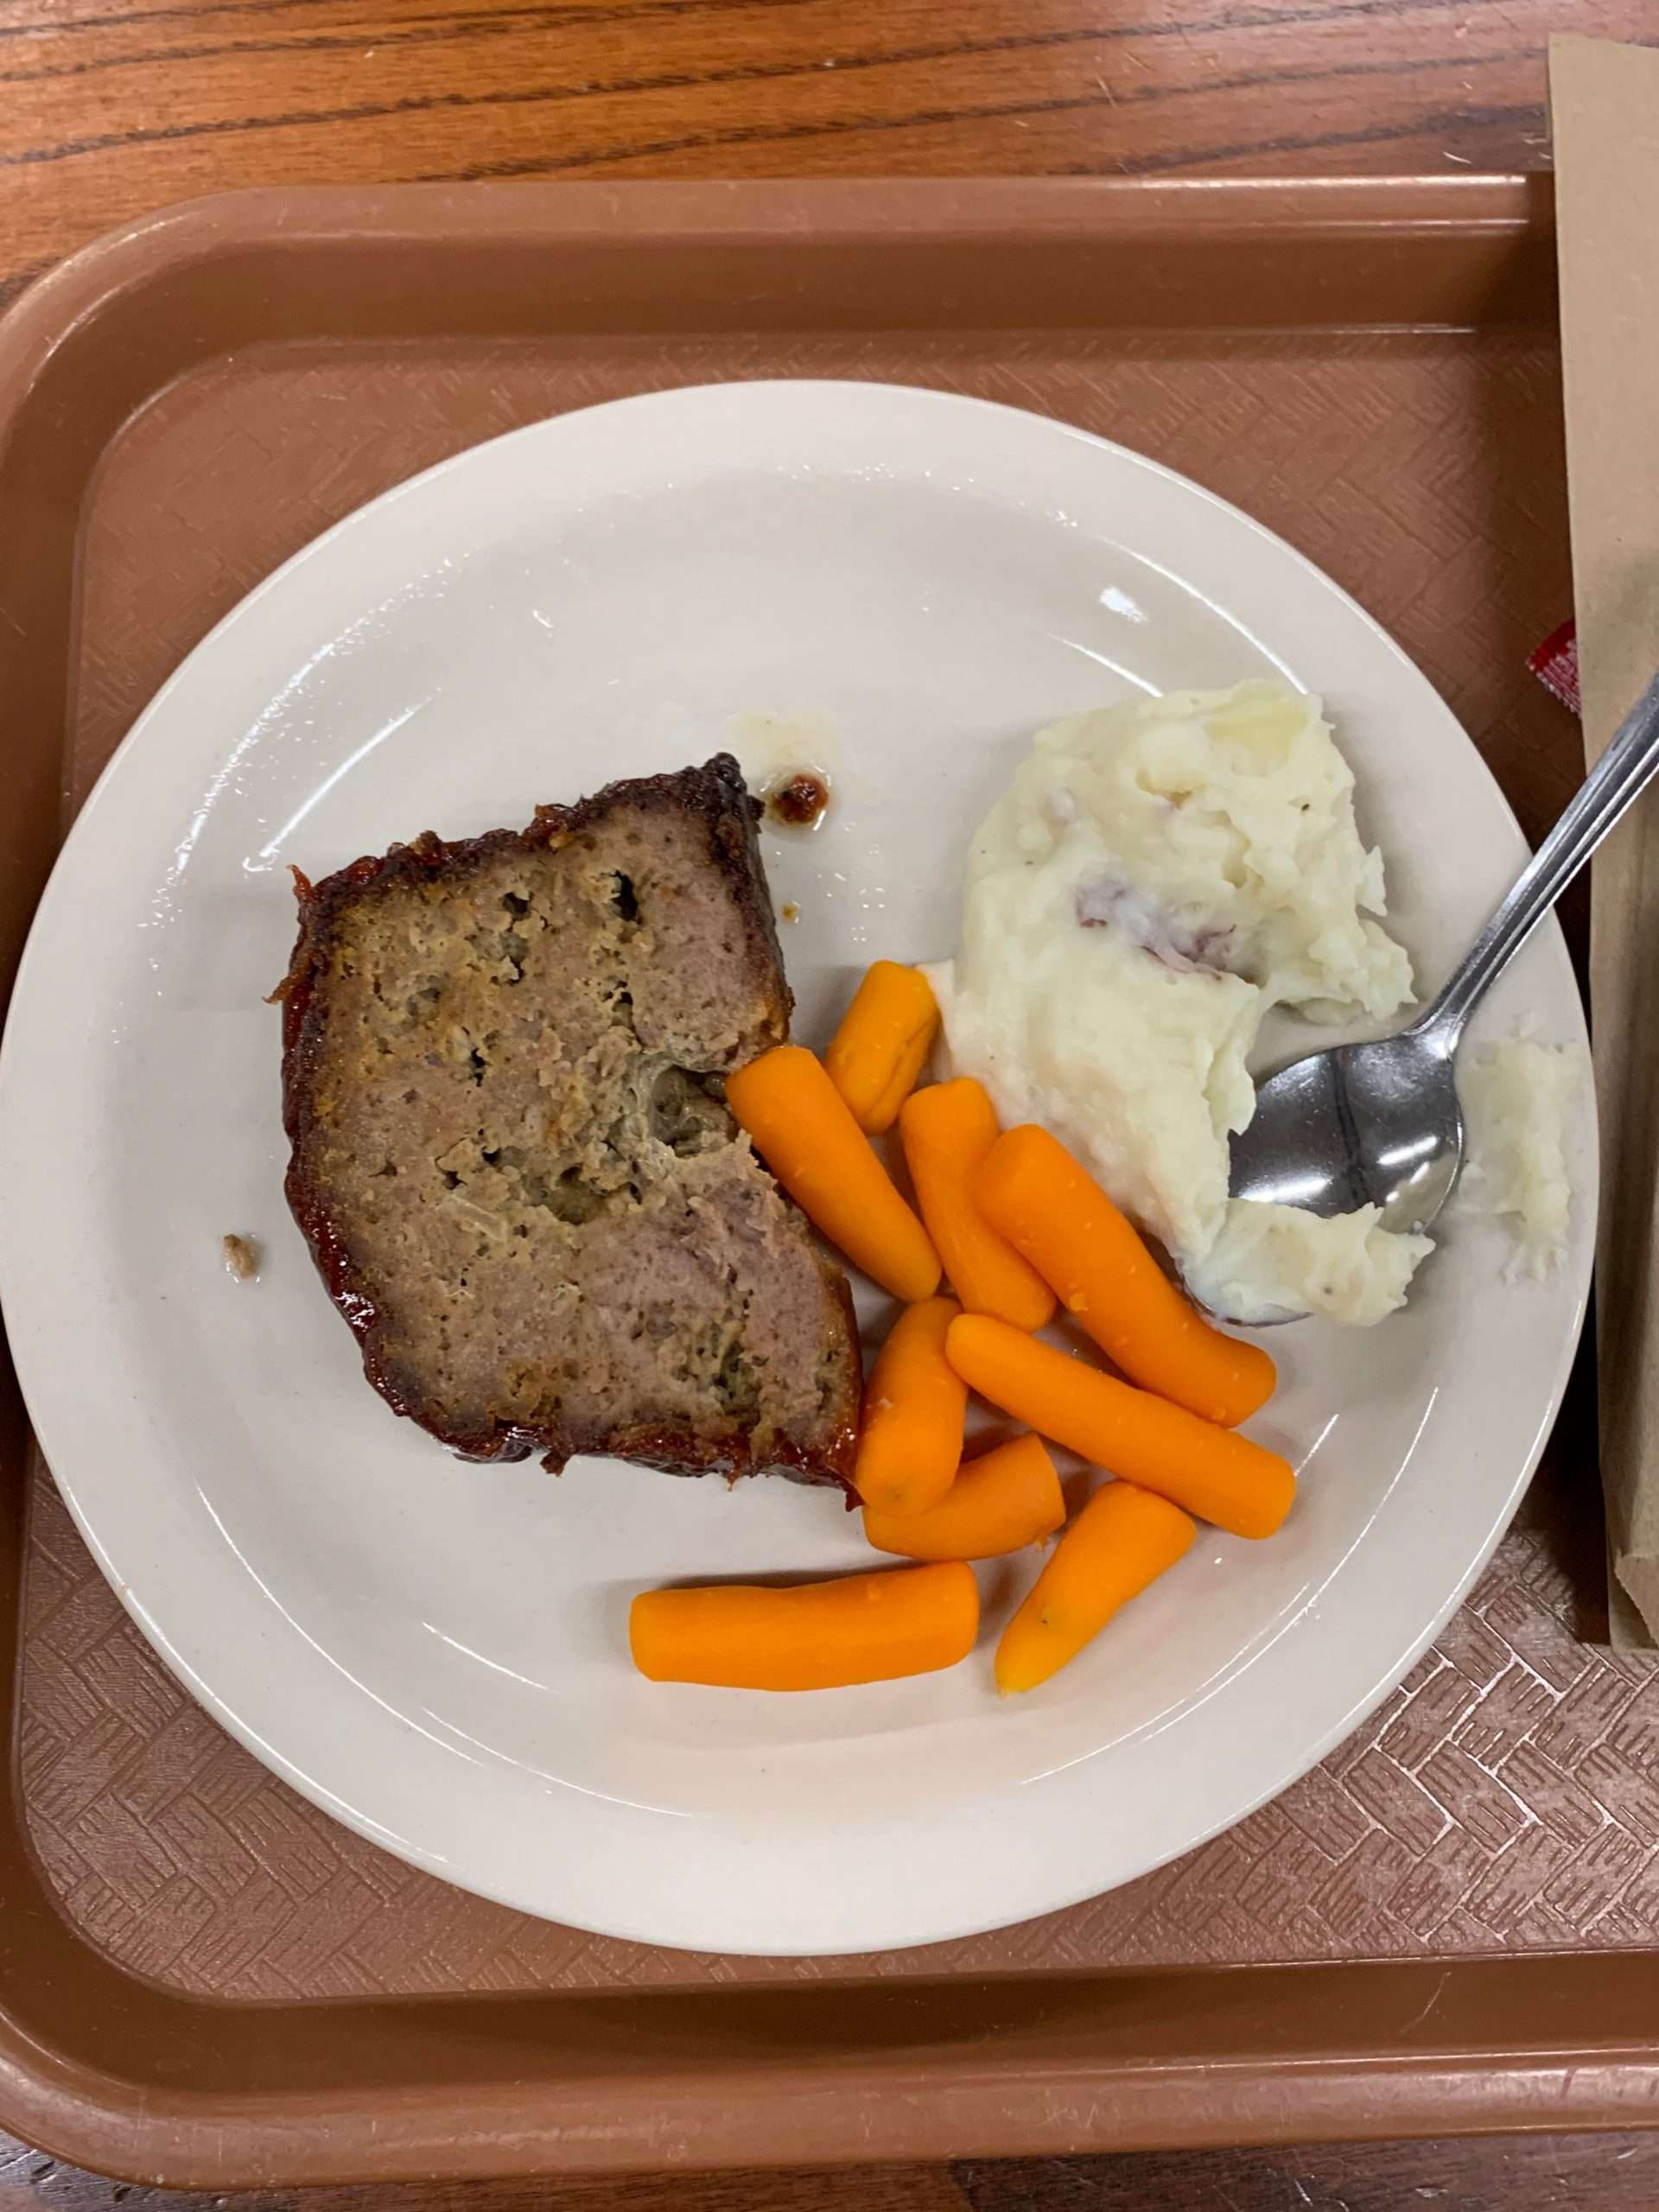 The food we get served at my boarding school which costs ...